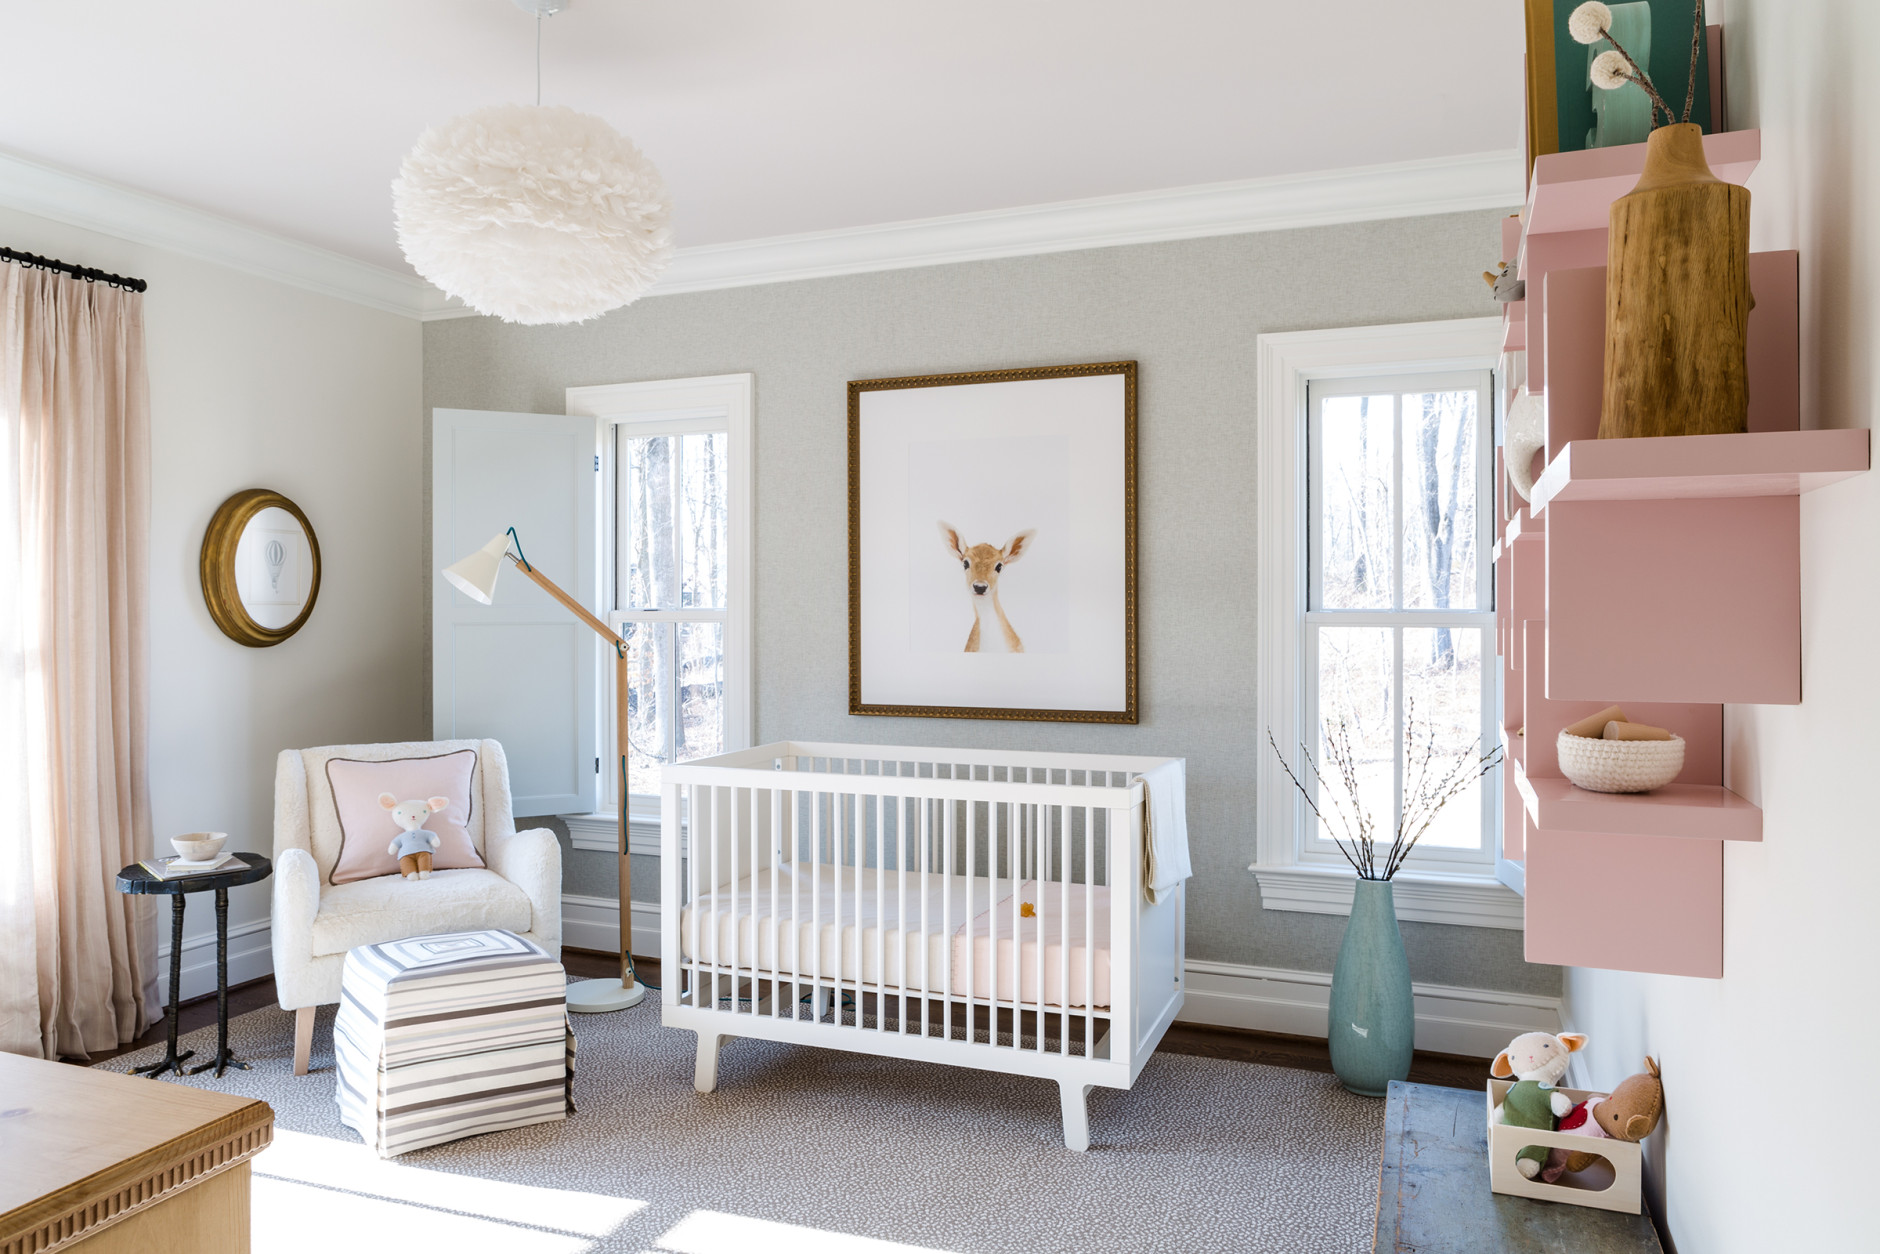 The nursery's design is kept clean and contemporary, in the space designed by Nancy Twomey from Finnian Interiors and Finnian's Moon. (WTOP/Rachel Nania) 